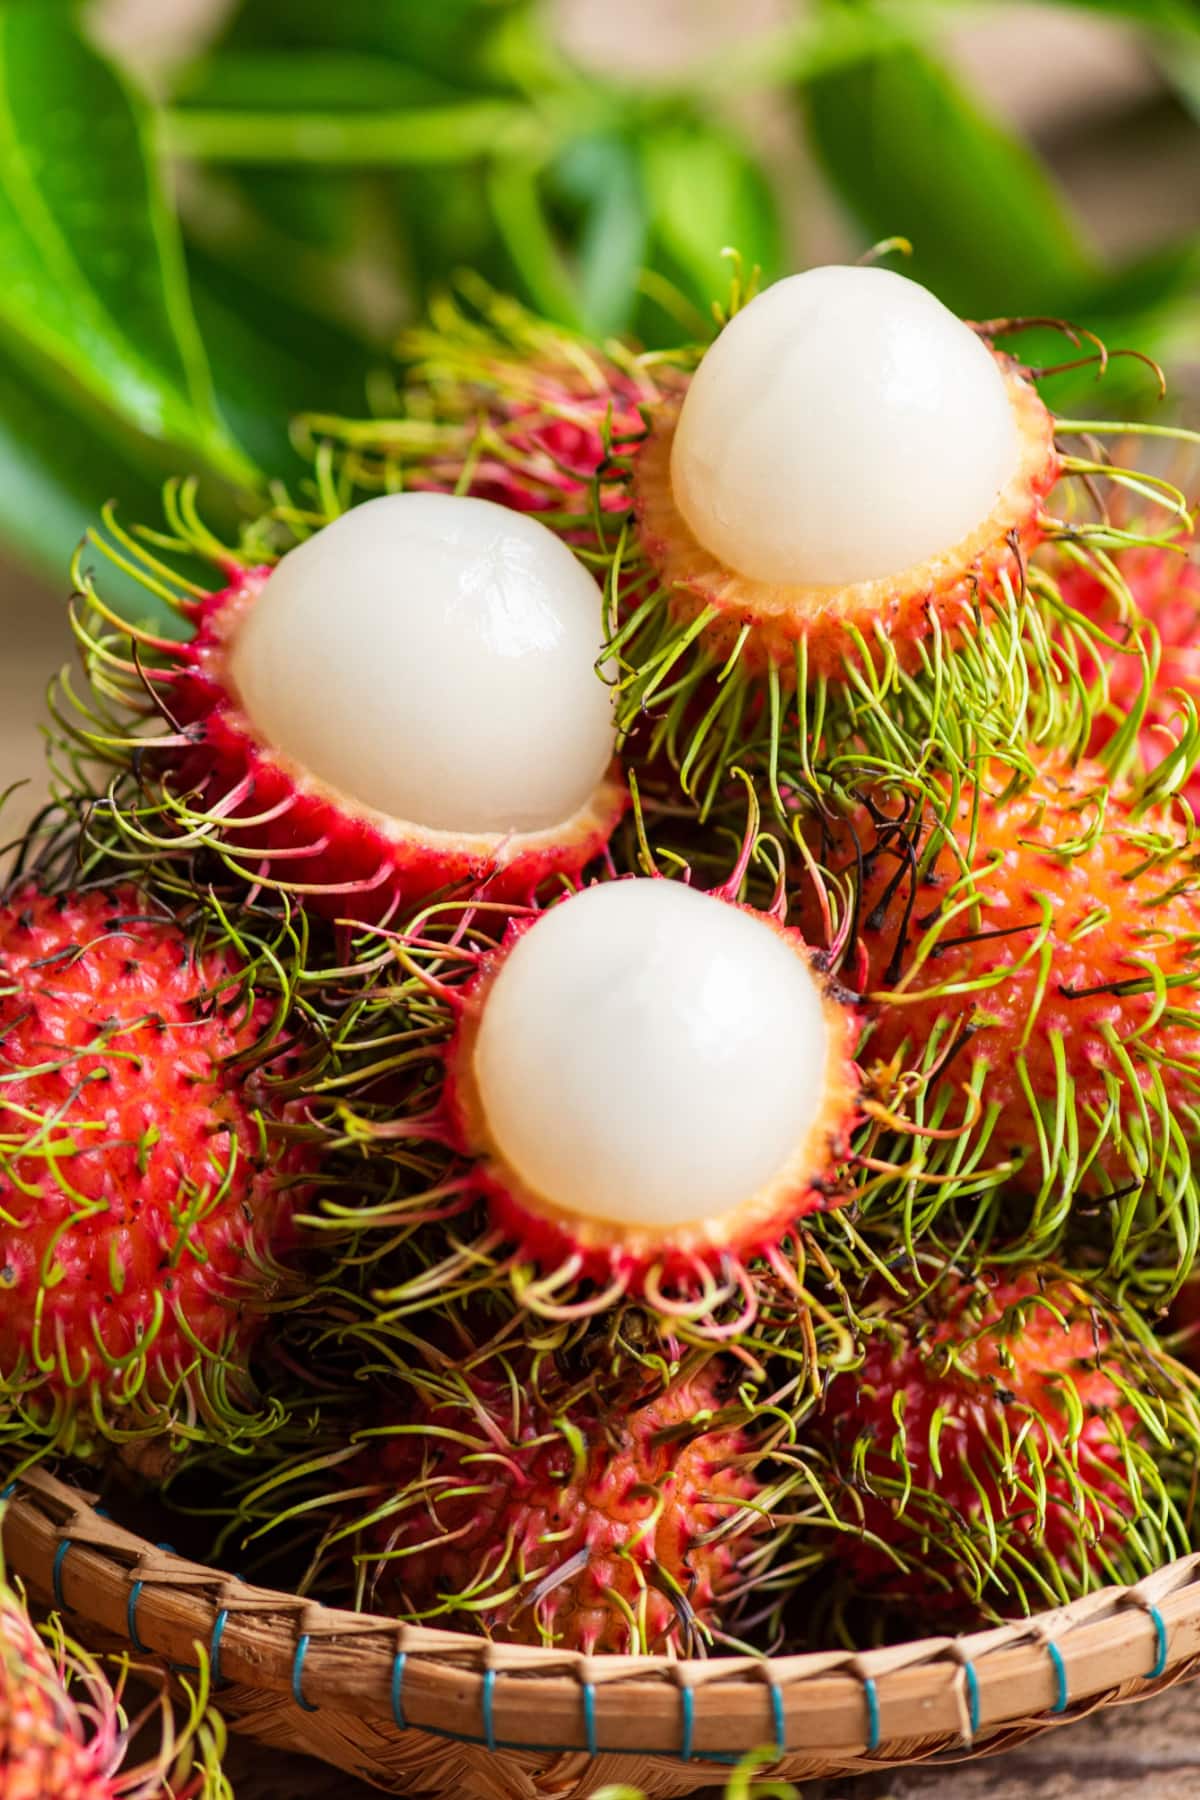 Rambutan vs. Lychee (What's the Difference?) featuring Bunch of Rambutan in a Bamboo Basket